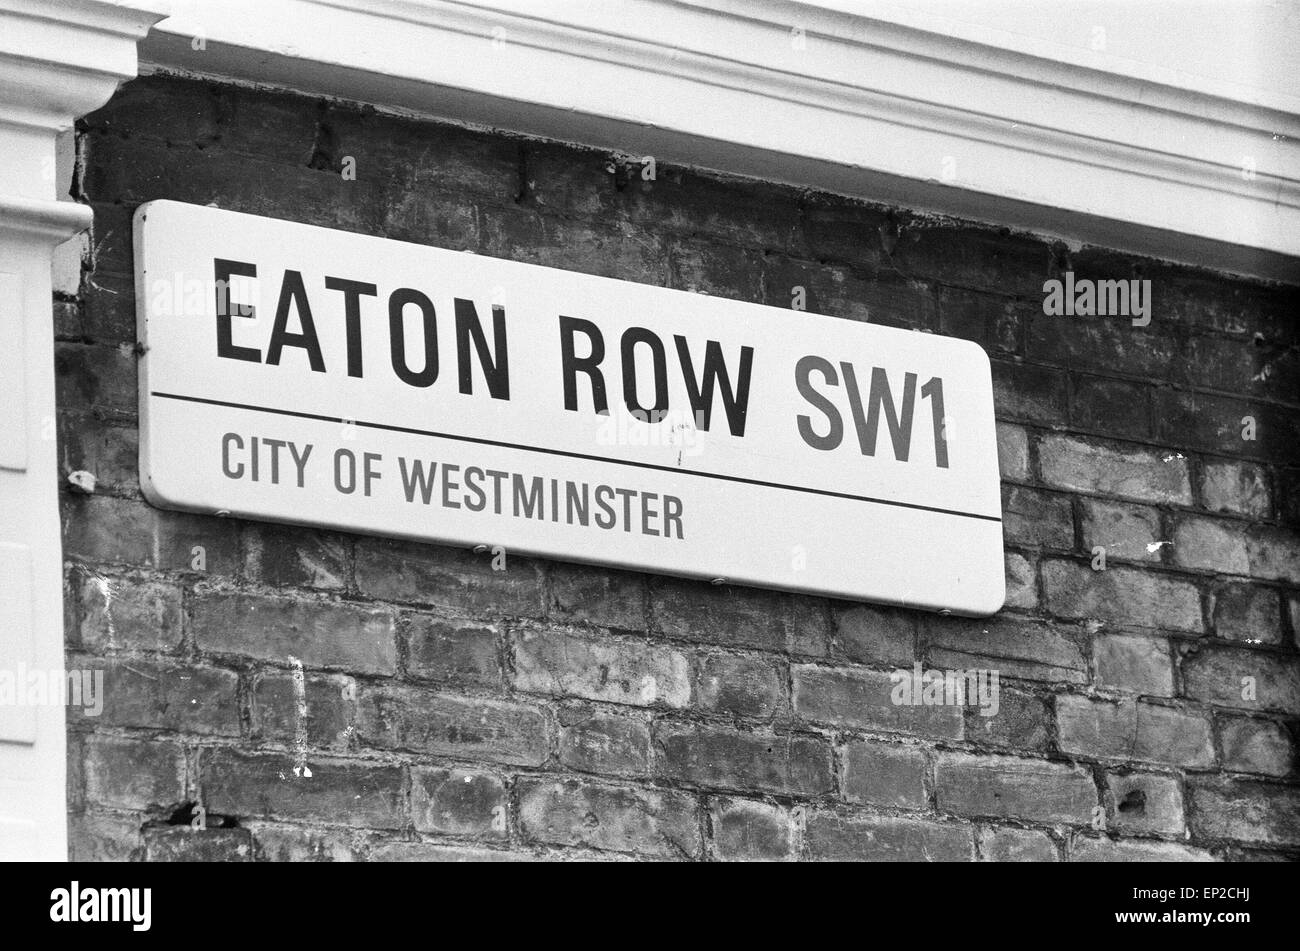 Sandra Rivett Murder November 1974. Eaton Row SW1 London location of mews home at the rear (of 46 Lower Belgrave Street) in Eaton Row where Lord Lucan lived. Richard John Bingham 7th Earl of Lucan popularly known as Lord Lucan was British peer who disappeared in the early hours of 8 November 1974 following the murder of Sandra Rivett his children's nanny the previous evening. There has been no verified sighting of him since then. On 19th June 1975 an inquest jury named Lucan as the murderer of Sandra Rivett. He was presumed deceased in chambers on 11th December 1992 and declared legally dead Stock Photo